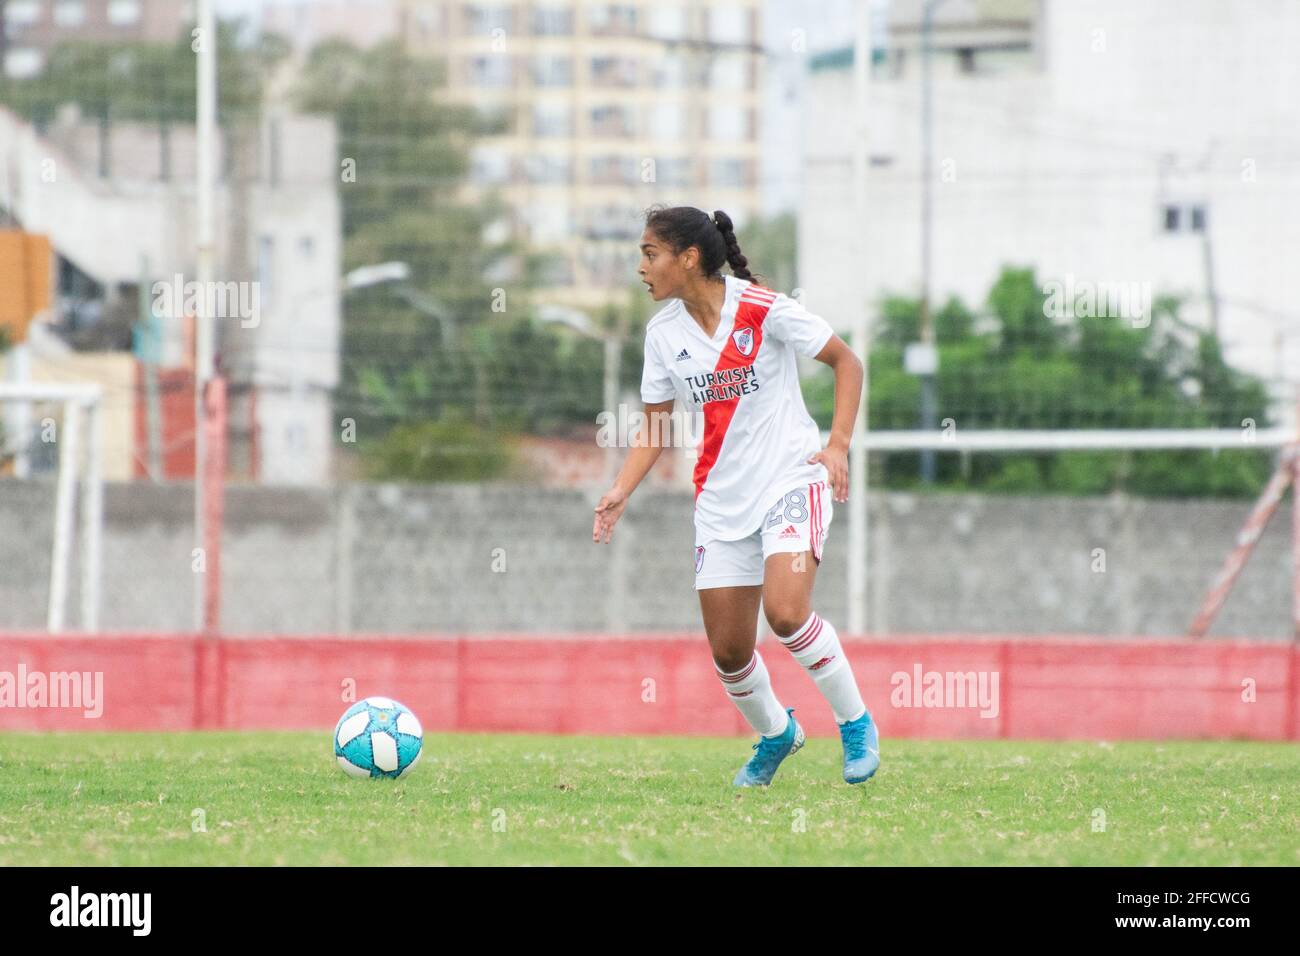 Buenos Aires, Argentina. 24th Apr, 2021. Sofia Dominguez (#28 River) during the game between Independiente and River Plate at Villa Dominico in Avellaneda, Buenos Aires, Argentina. Credit: SPP Sport Press Photo. /Alamy Live News Stock Photo